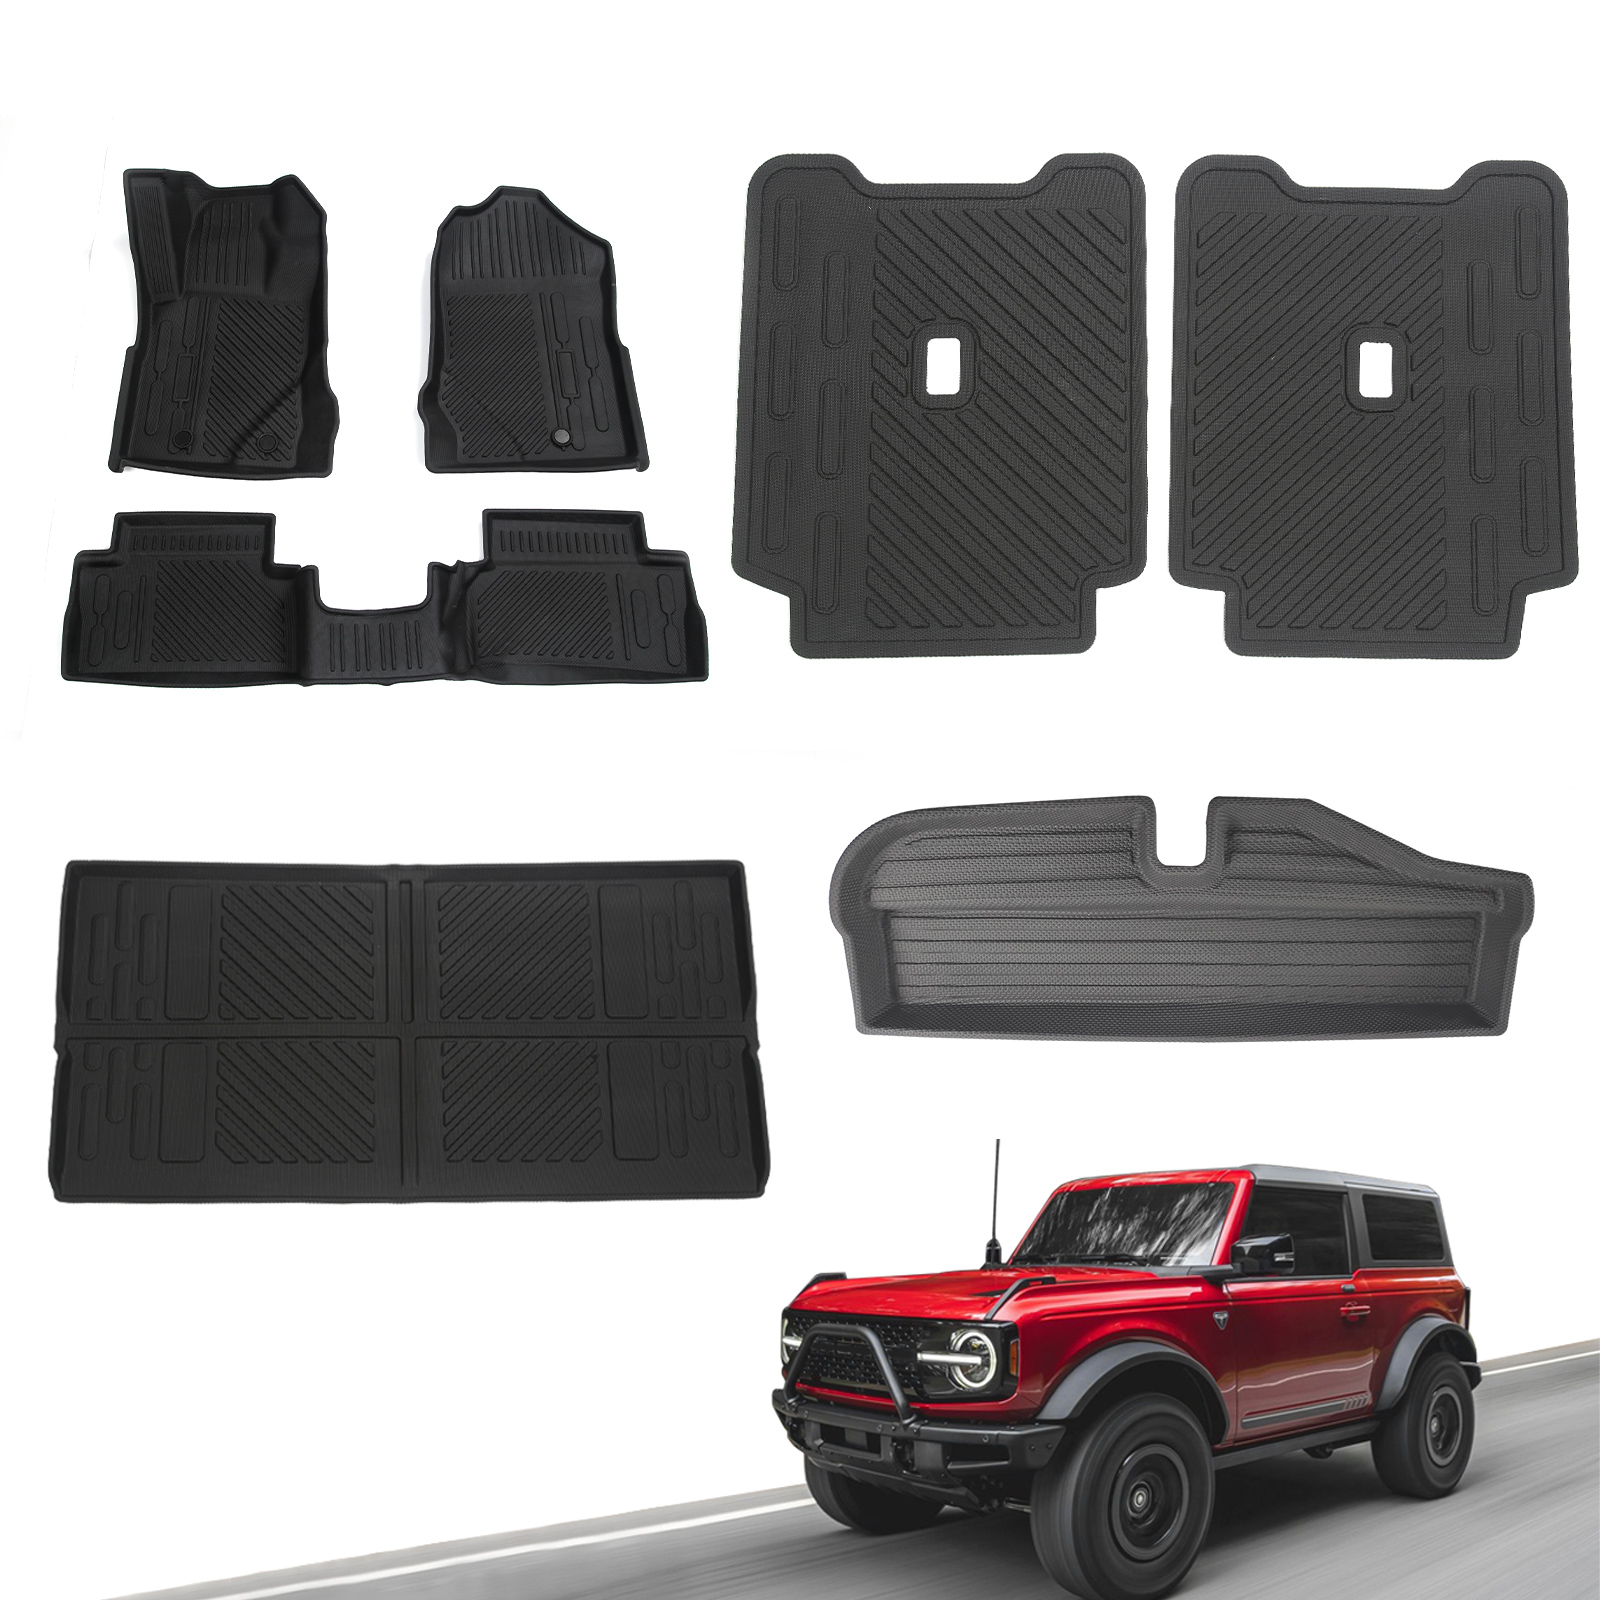 Ford Bronco Mabett's list of products on sale and some discount codes! ! ! 98ECE079-06D3-4C6F-85D0-EF0F6D04A495